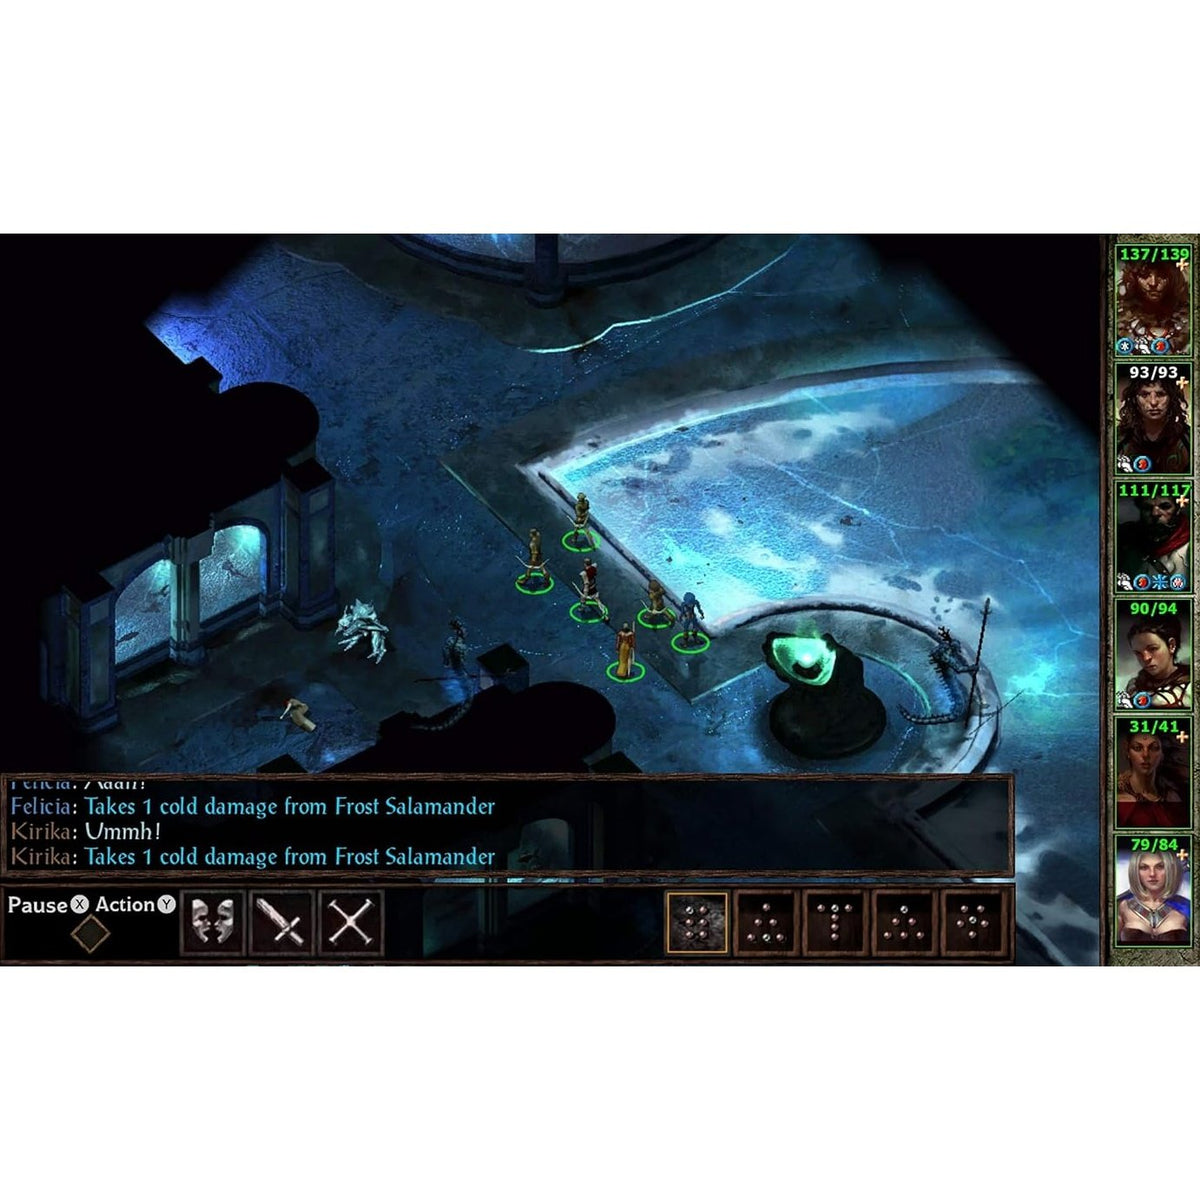 Planescape: Torment & Icewind Dale Enhanced Edition Nintendo Switch